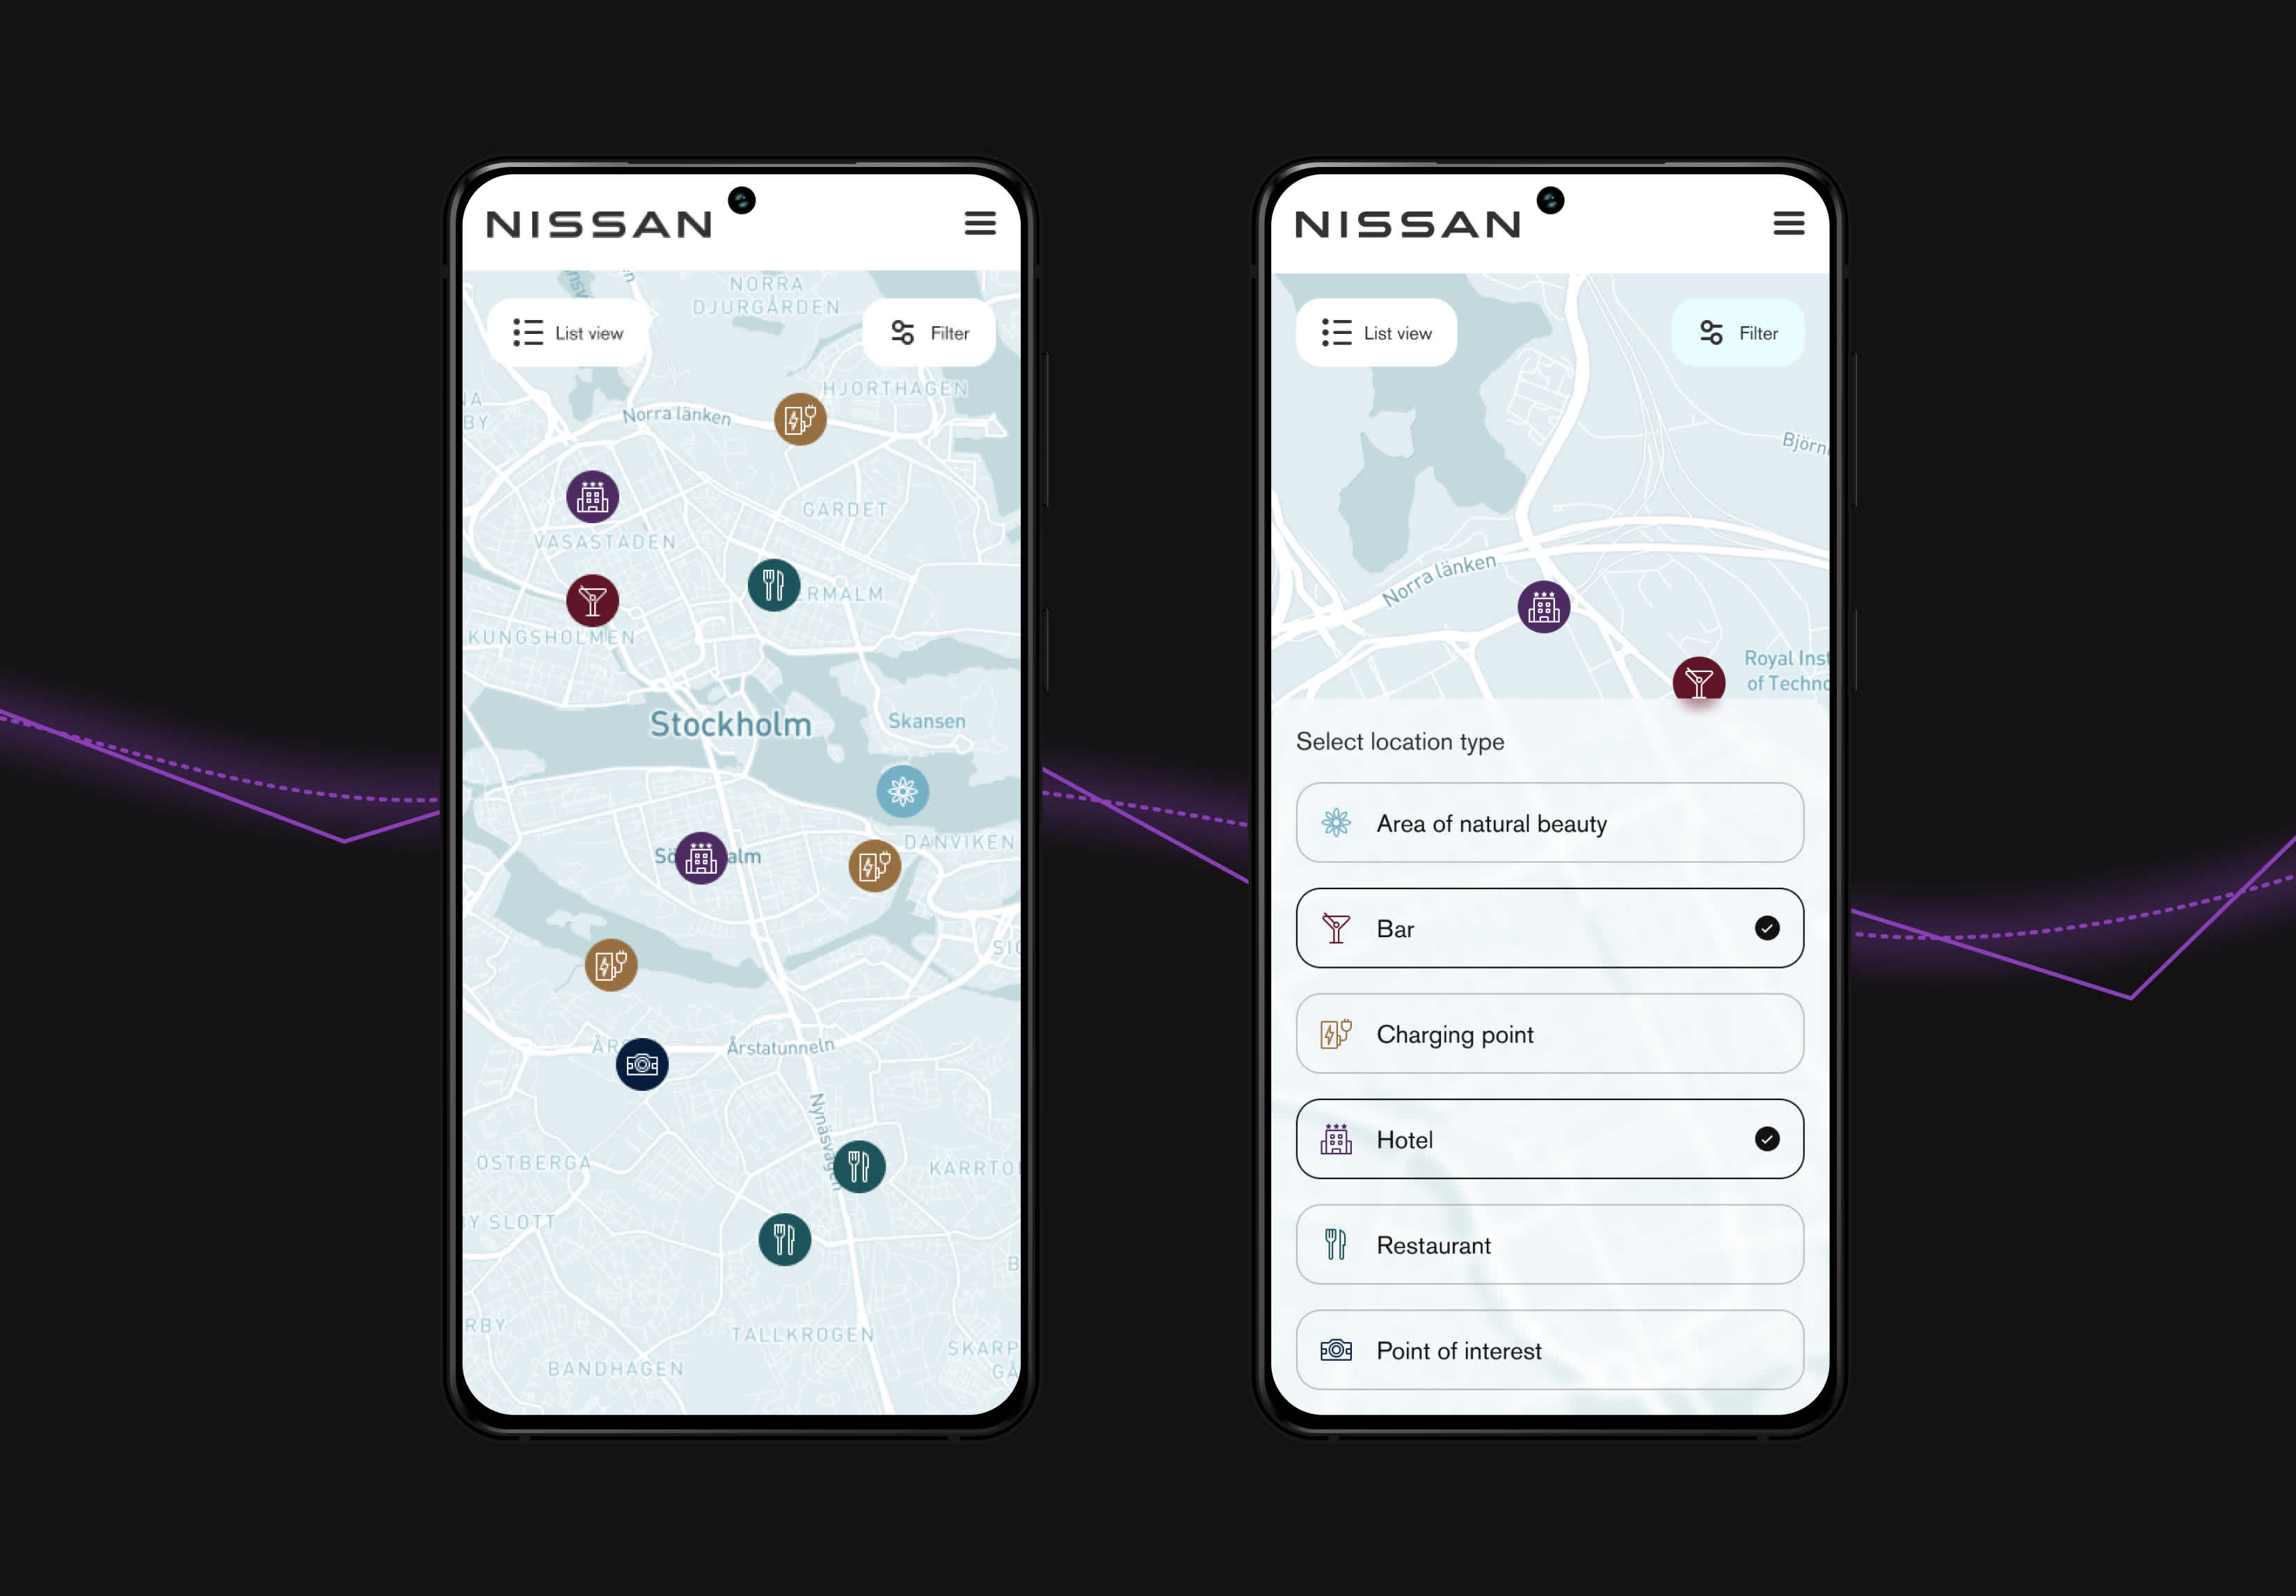 the nissan travel guide map view in 2 mobile devices, one has all of the different types of map pins in view and the other has the filter menu open